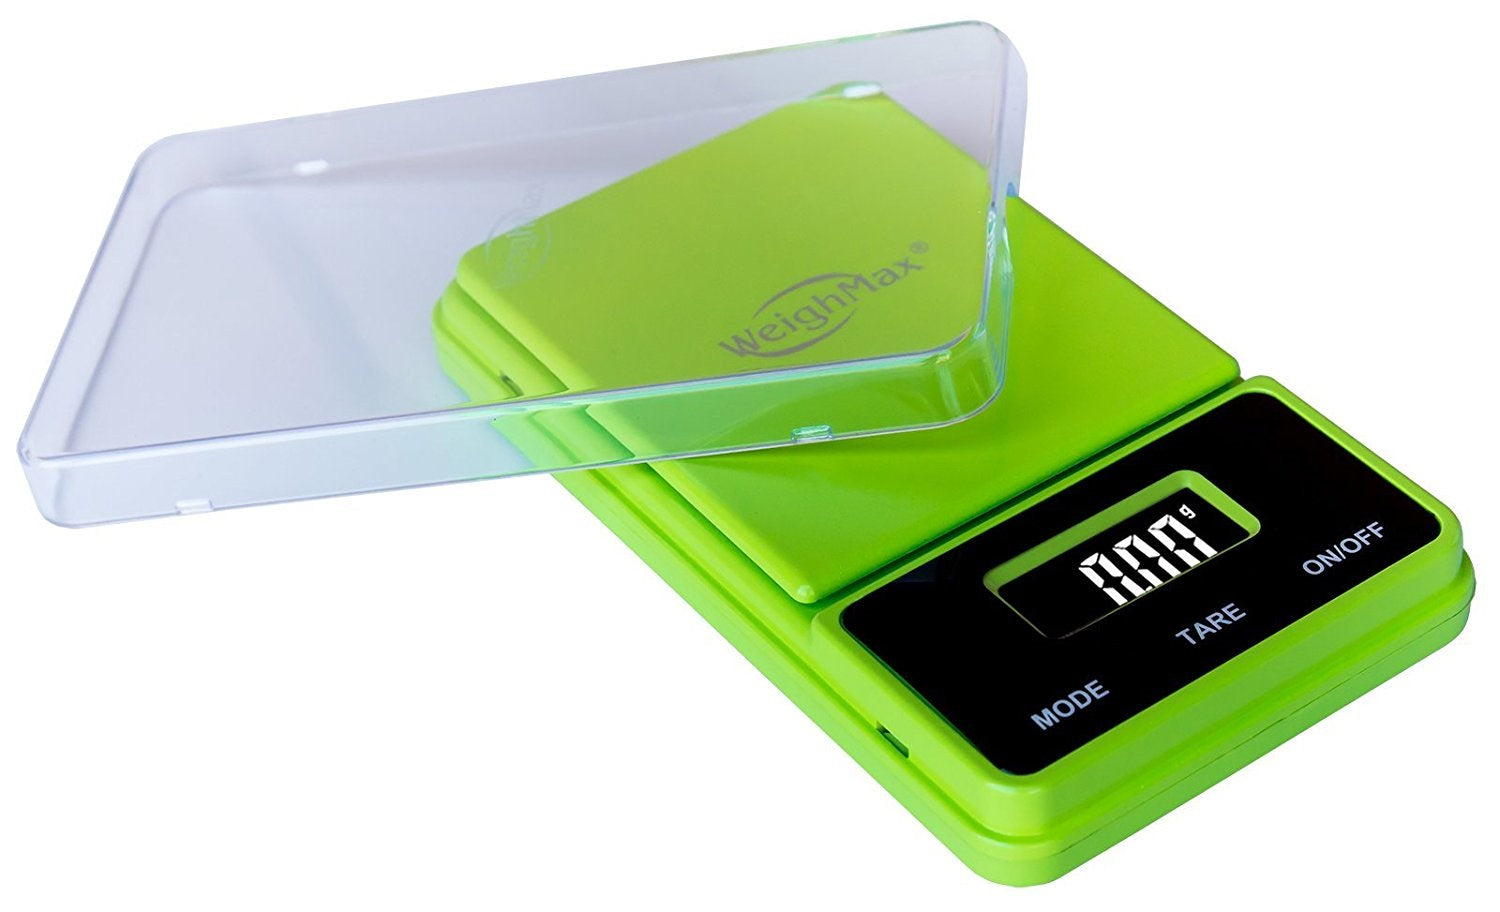 WeighMax | NJ-100 Digital Scale | 100g Capacity - 0.01g Readability - Various Colors Scale Biohazard Inc Green  